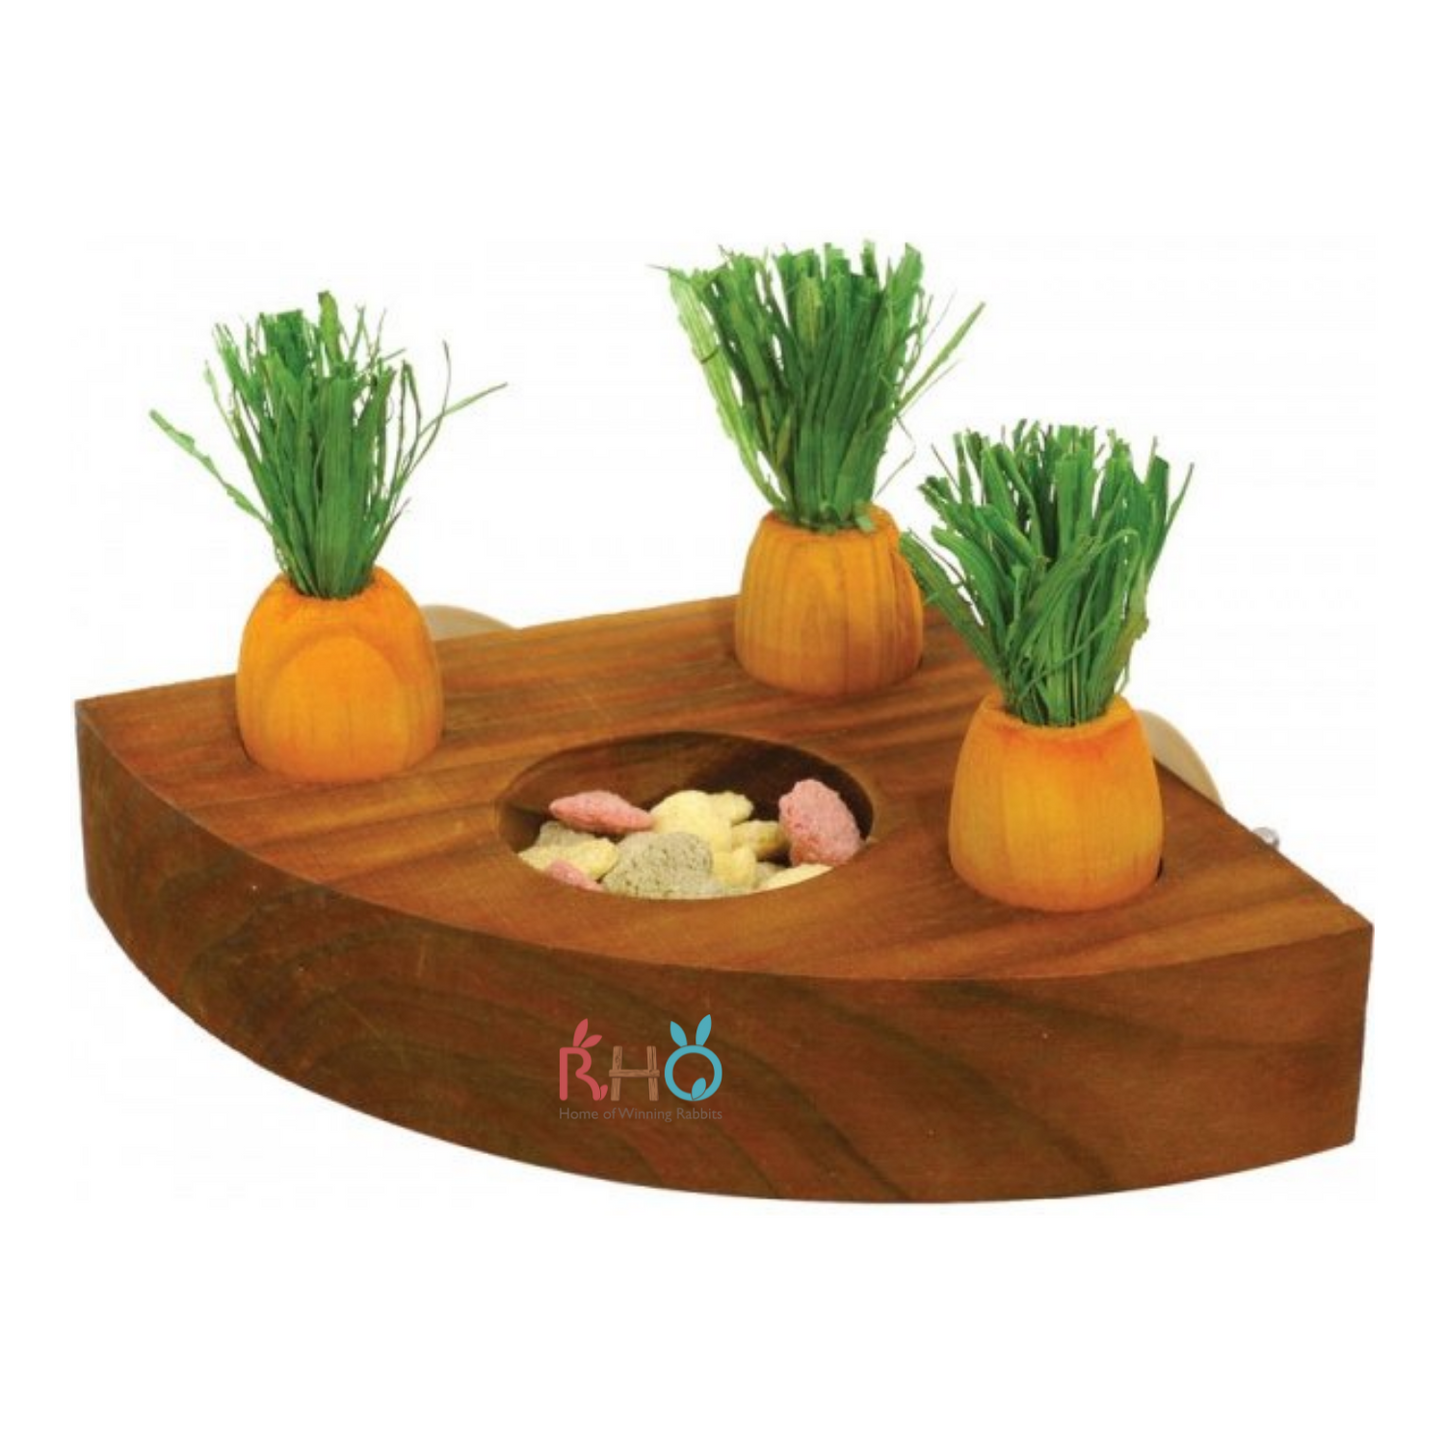 Rosewood - Carrot Toy & Treat Holder